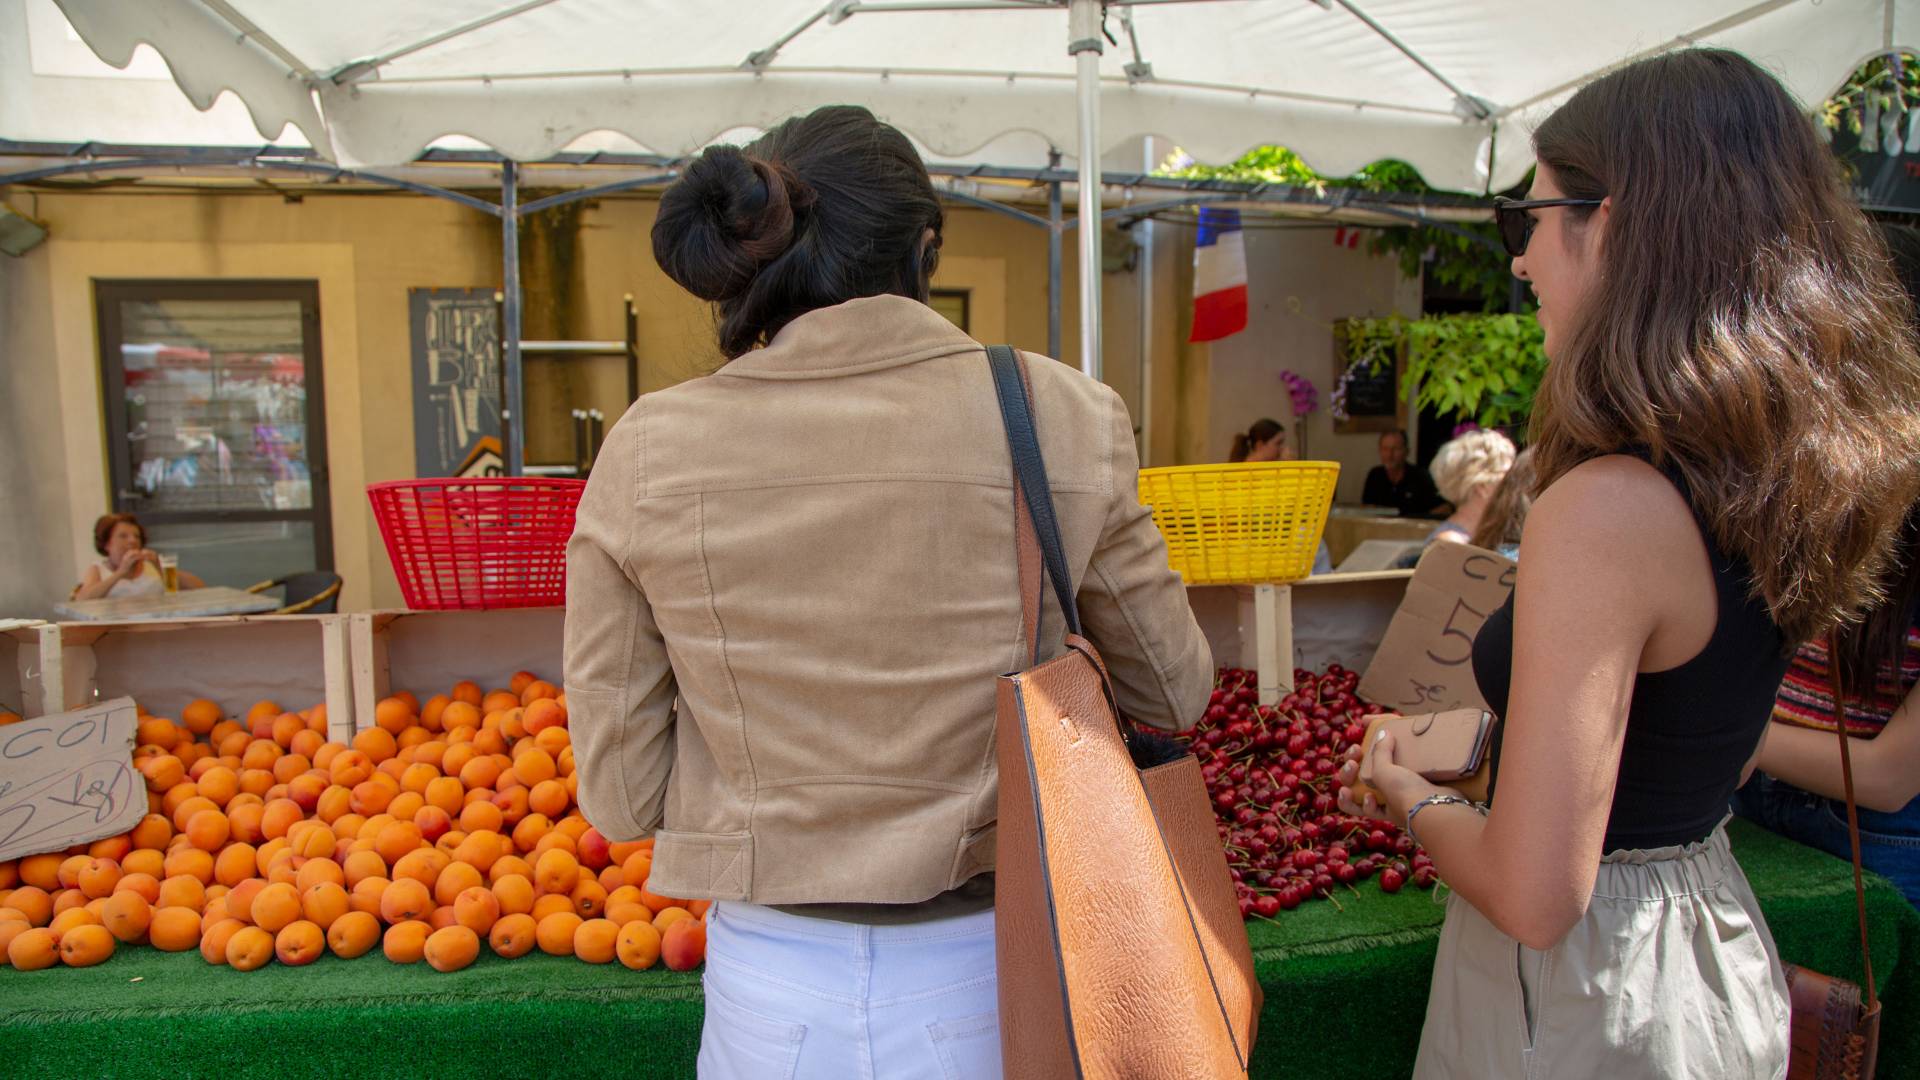 Students looking at fruit in outdoor market in France